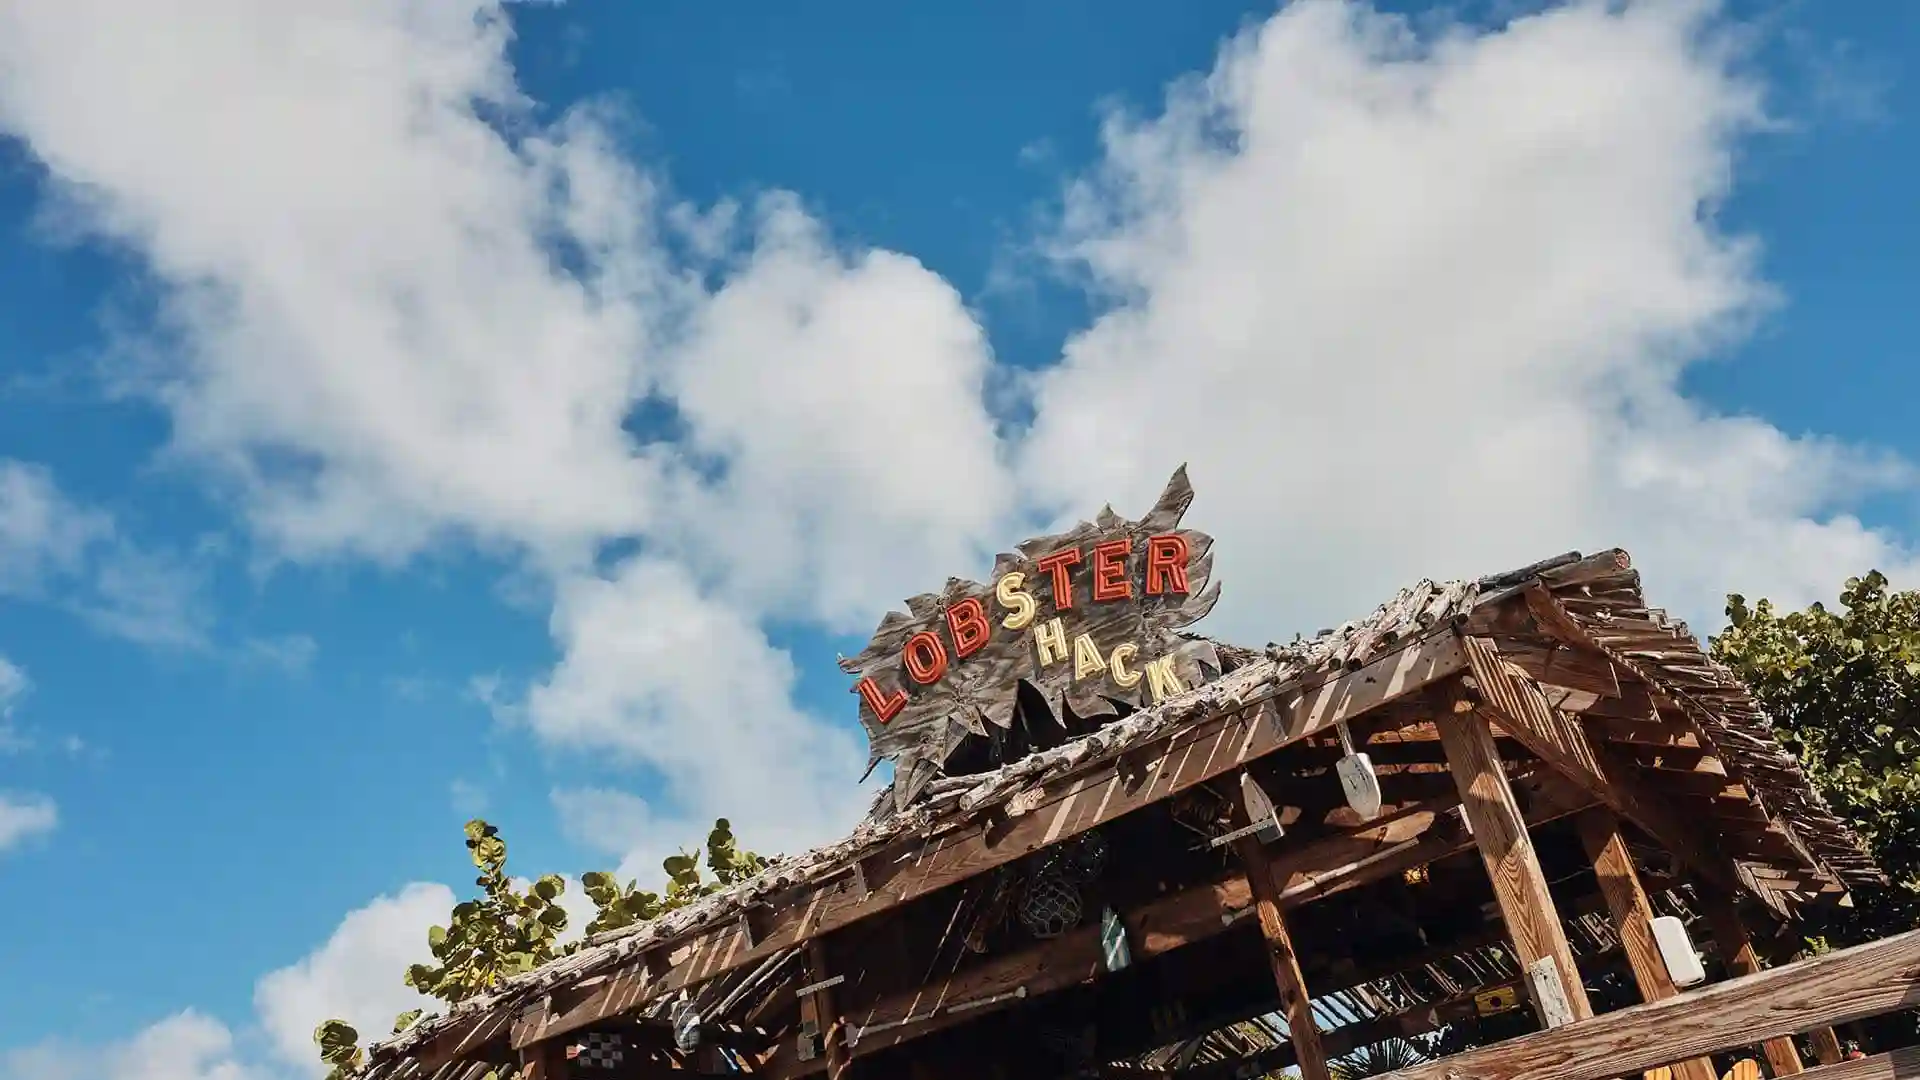 View of Lobster Shack sign beneath partly cloudy sky in Half Moon Cay, Bahamas.